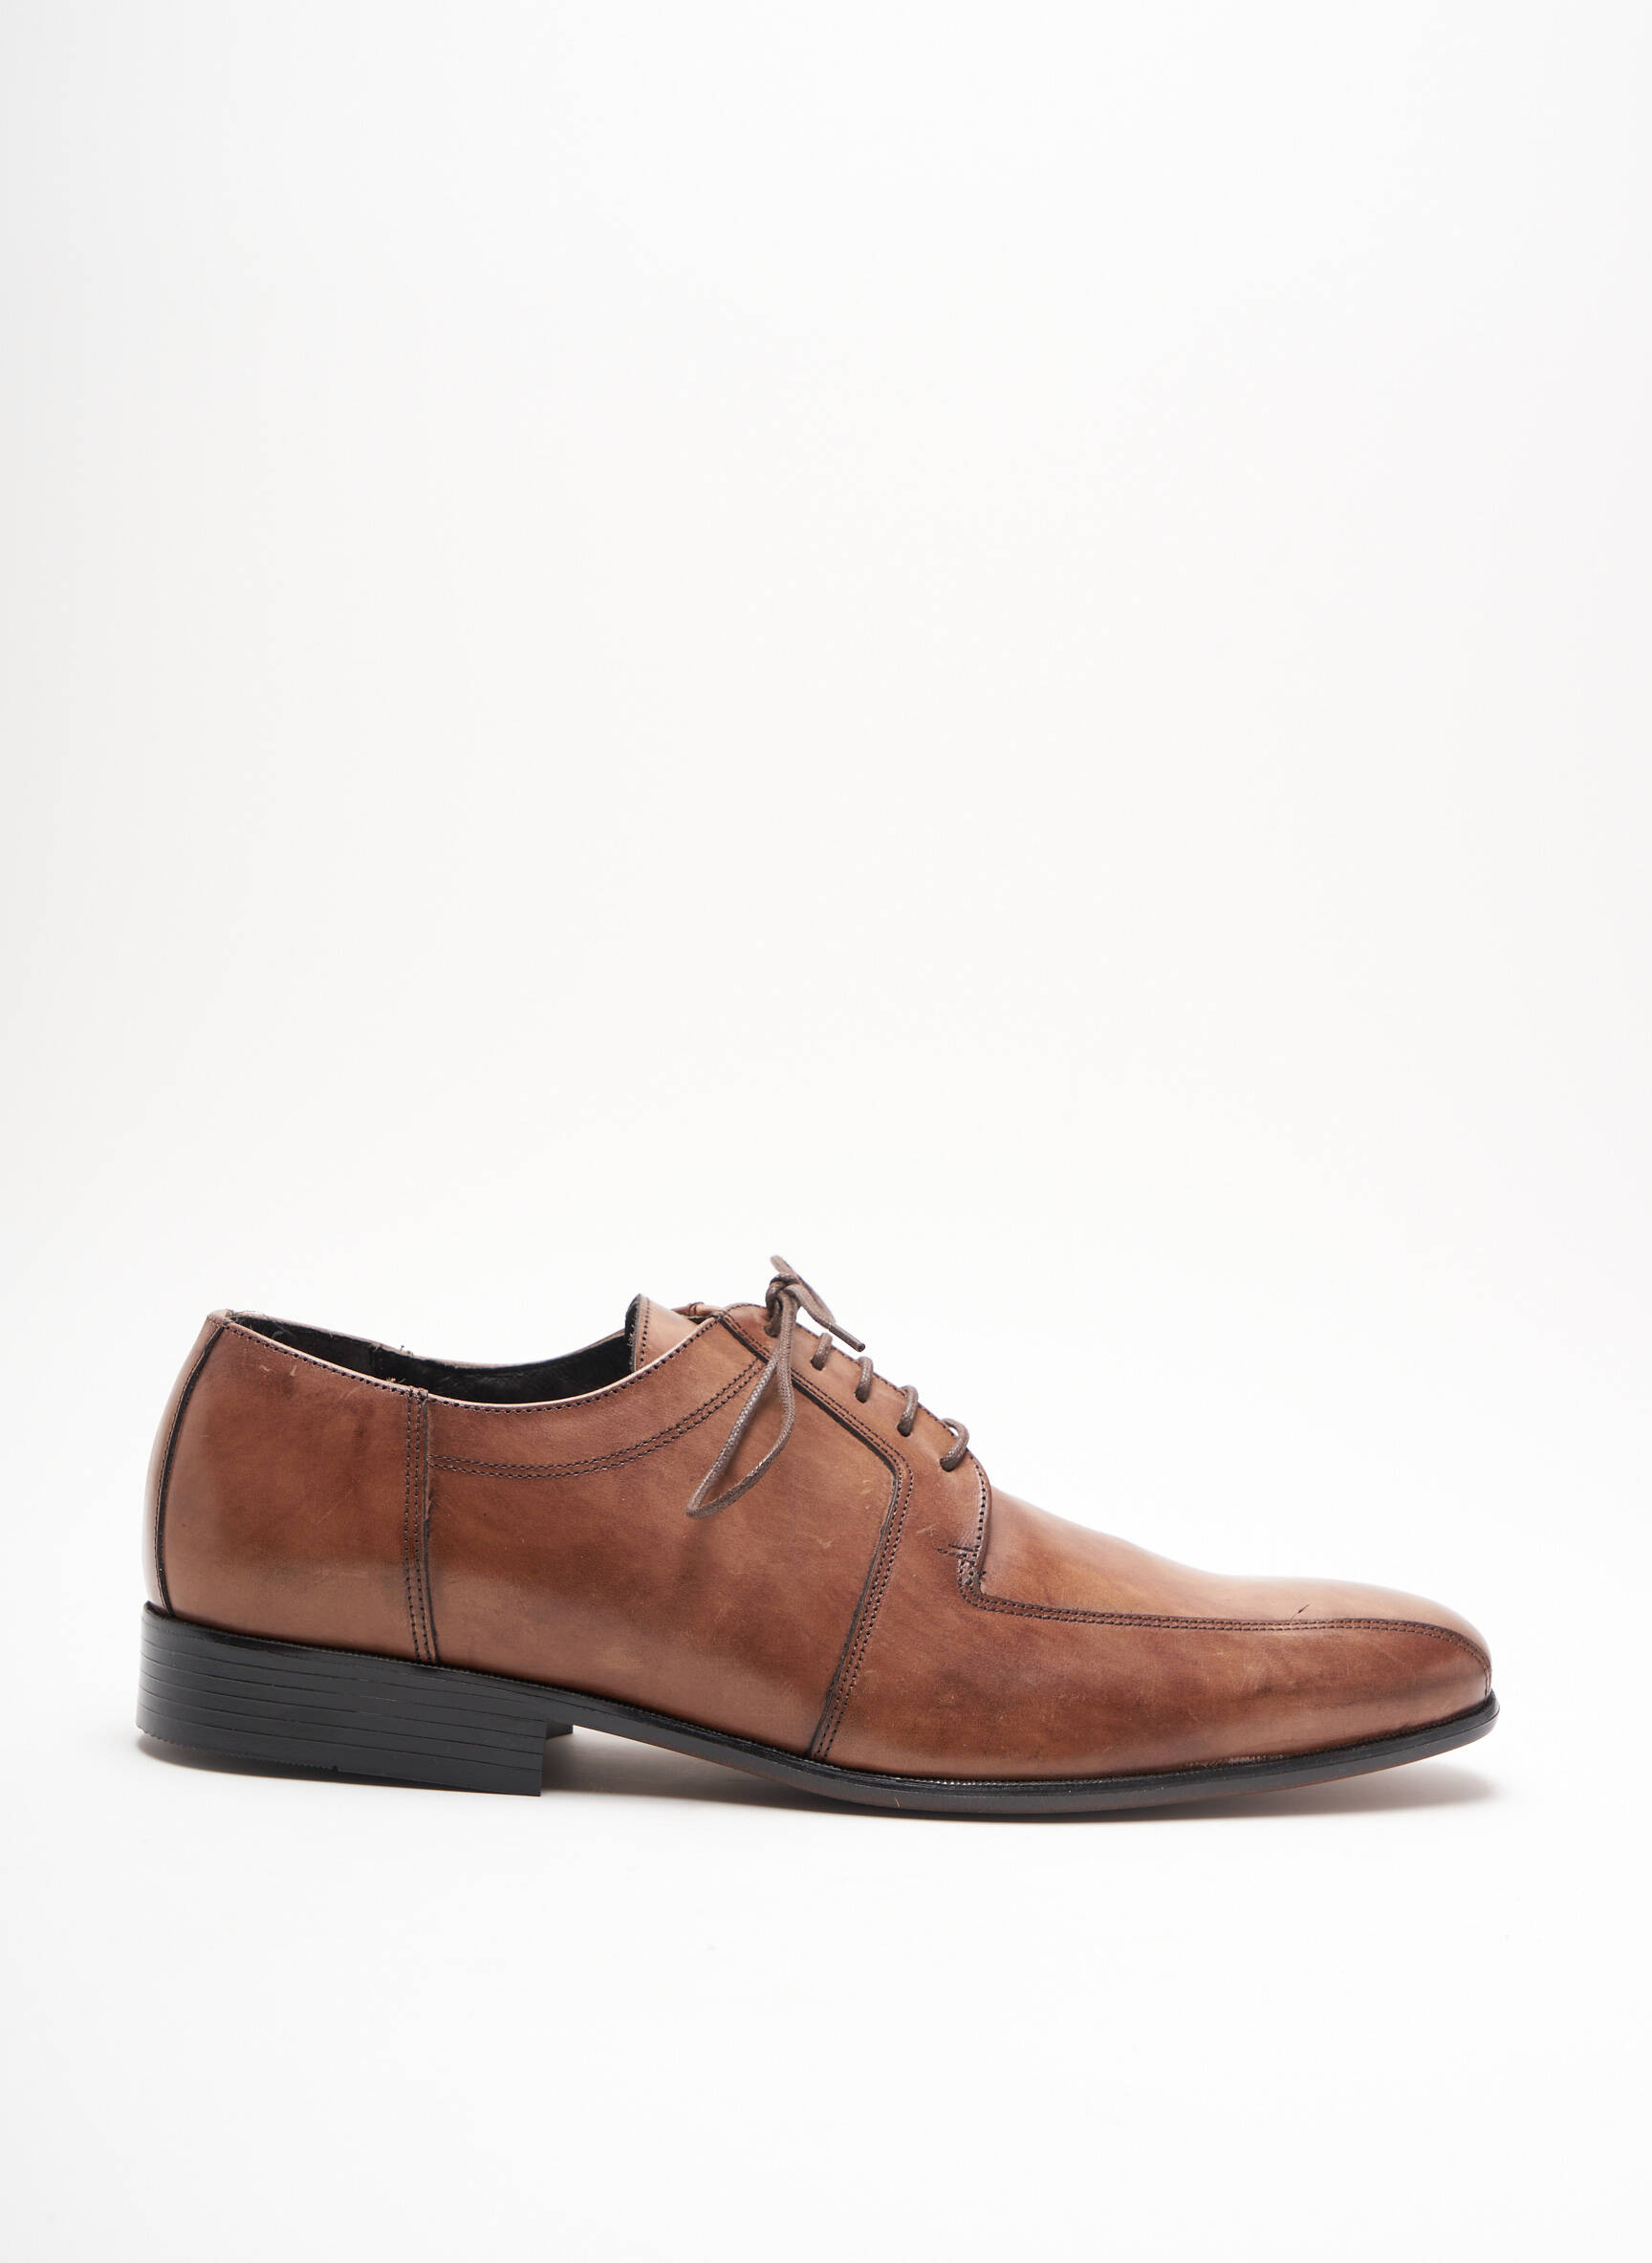 Chaussures Homme & Masculines